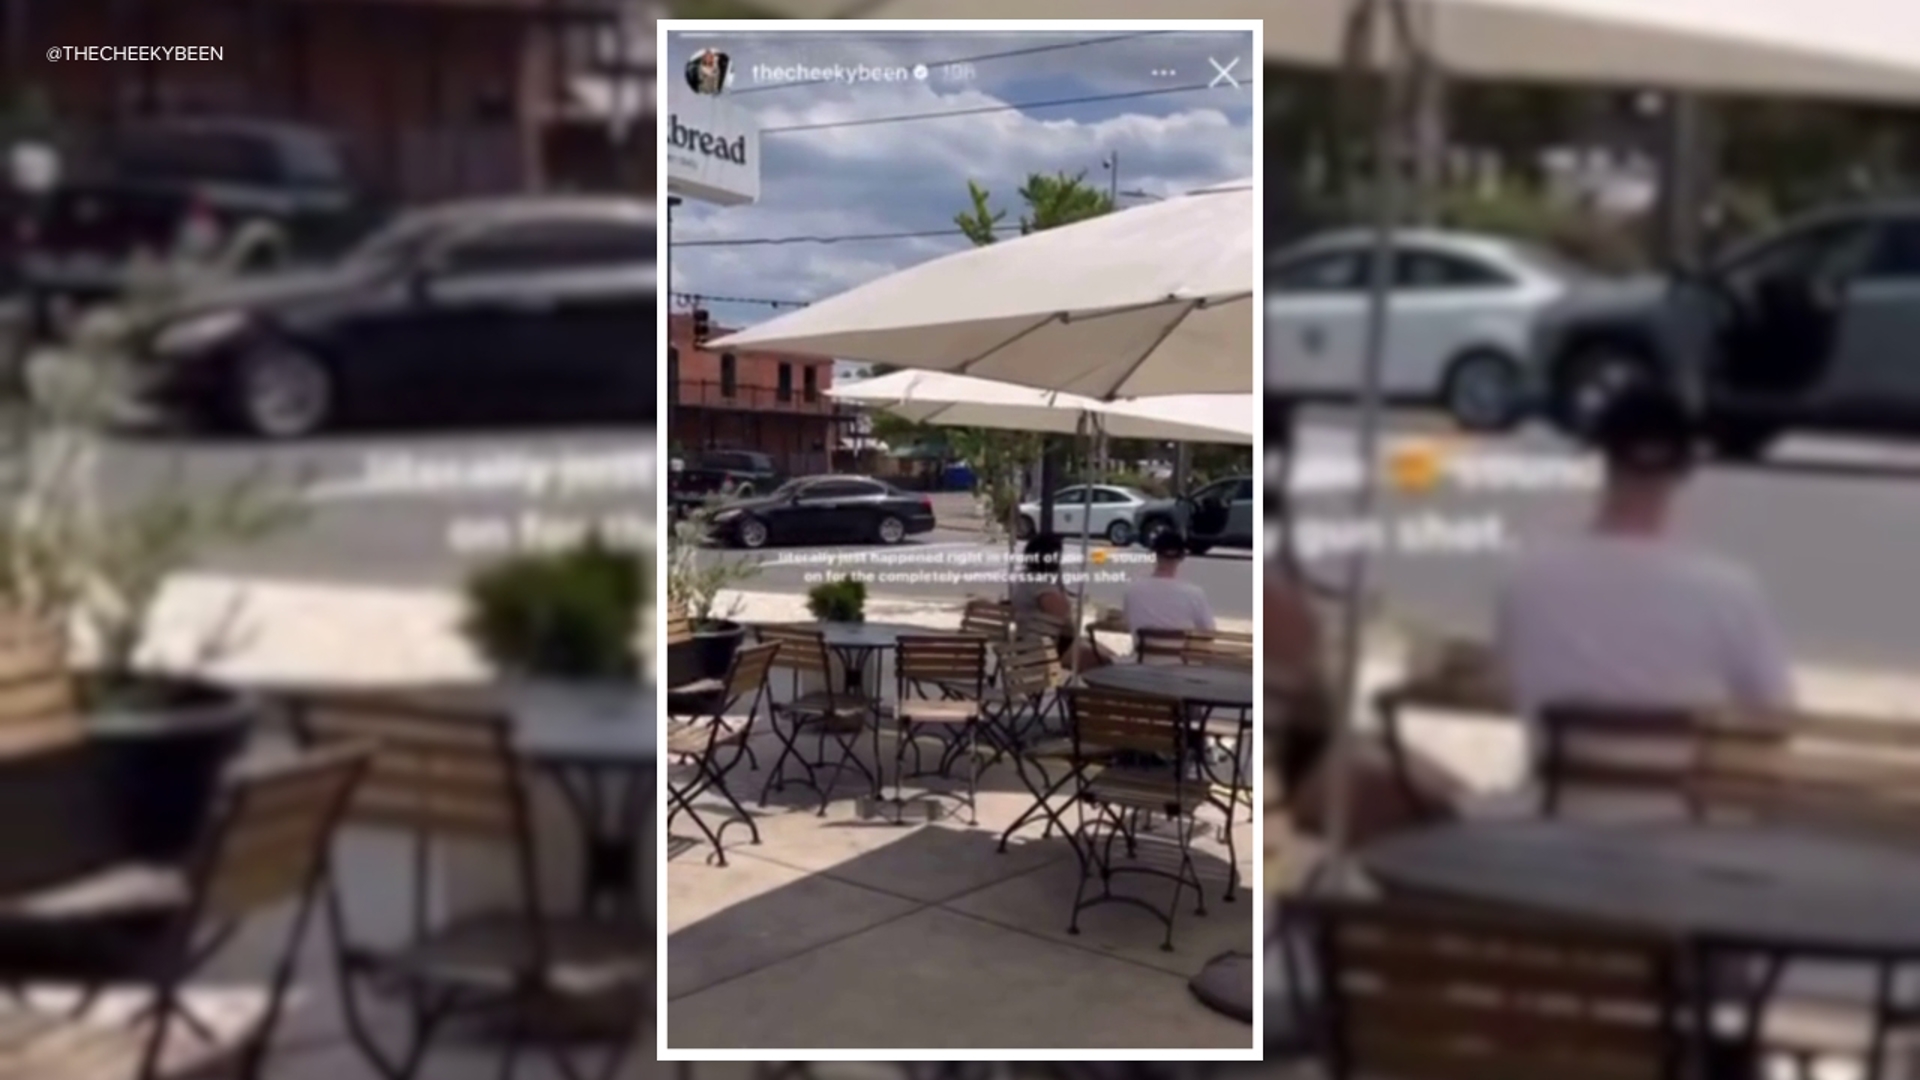 Video shows moments gunfire rang out during a daylight shooting near Milkbread in Charlotte's Plaza Midwood neighborhood. (Via @thecheekybeen on Instagram)